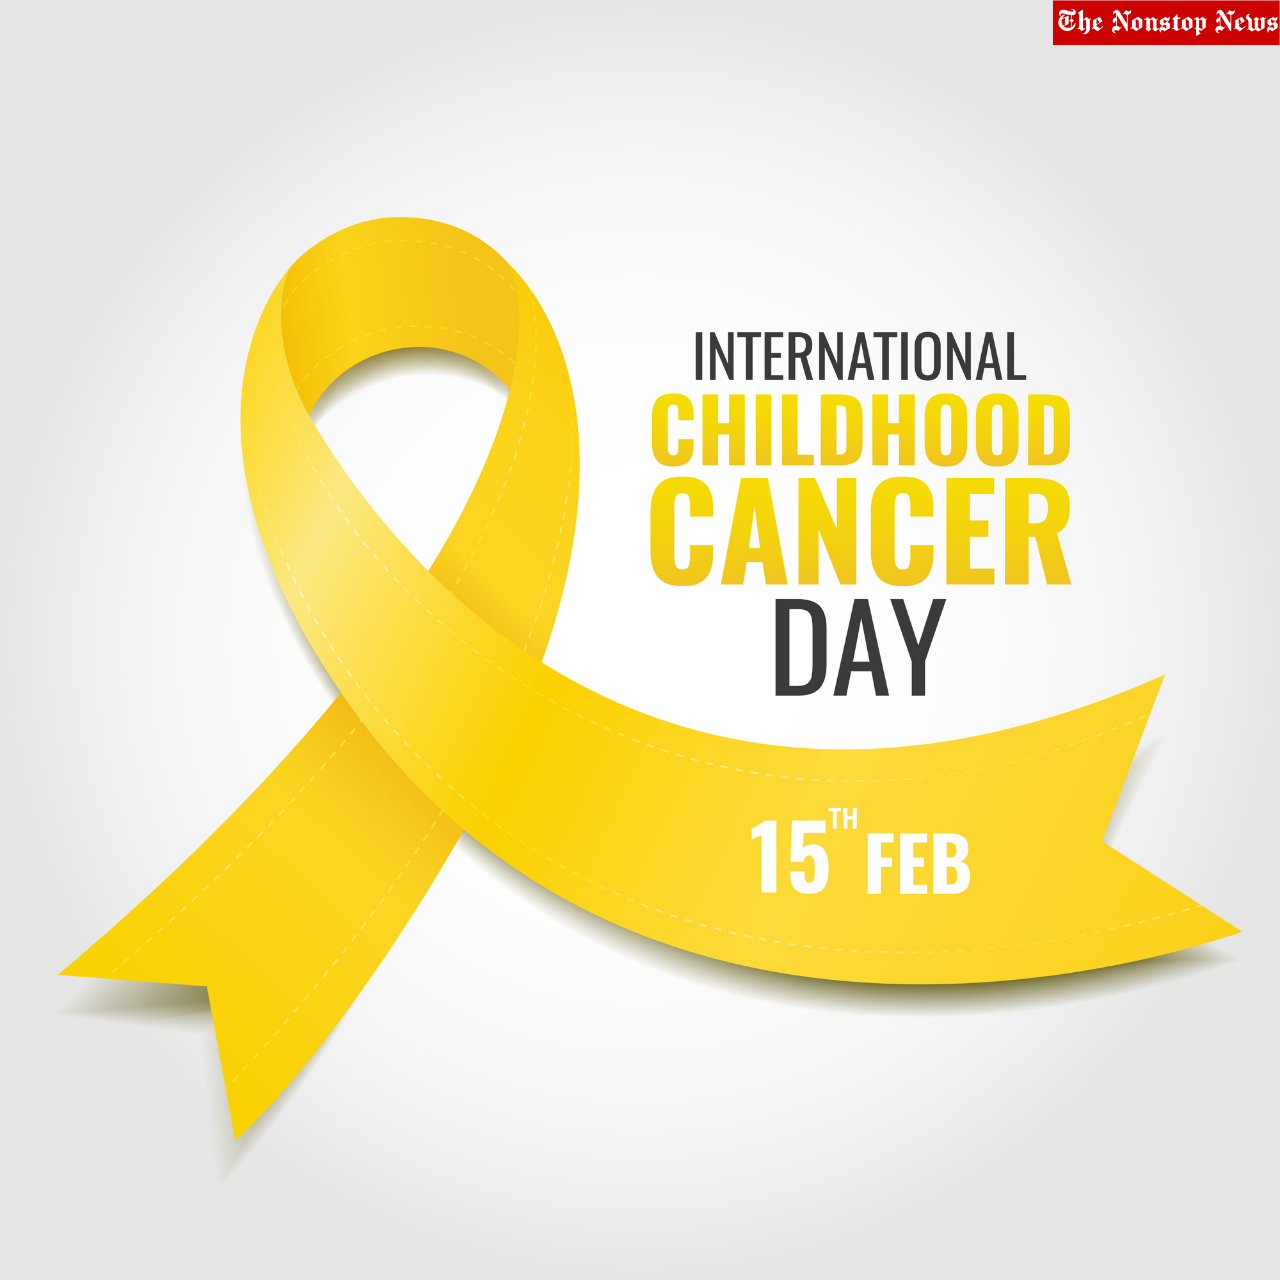 International Childhood Cancer Day 2022 Theme, Quotes, Messages, HD Images, Posters to create awareness